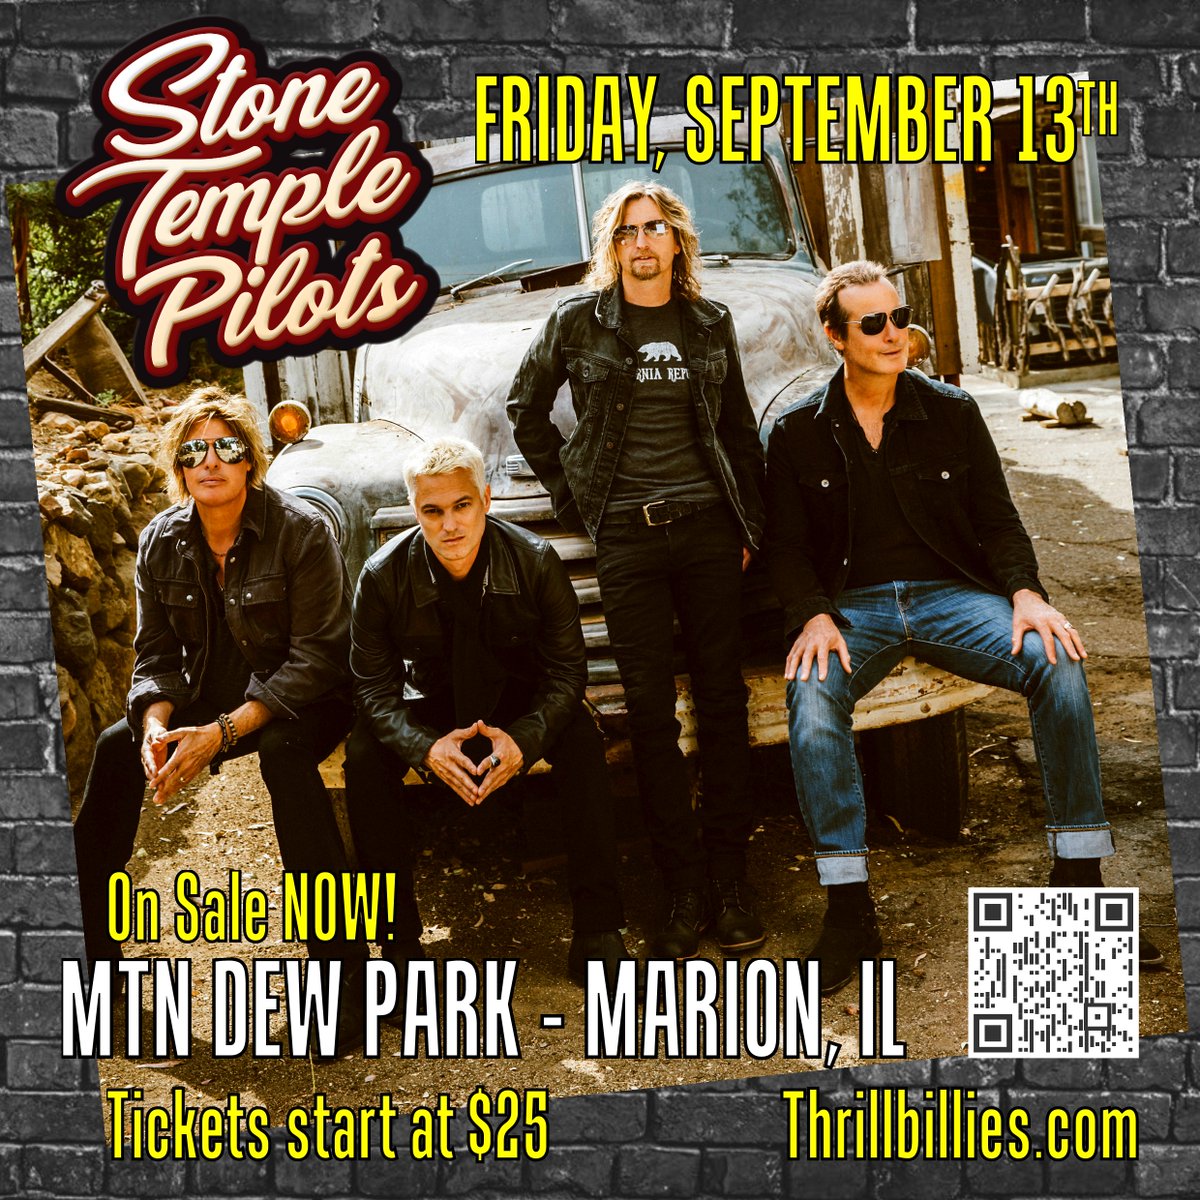 🎶 🎵Where ya going for tomorrow?! 🎶 🎵 Where ya going September 13th?! Tickets to Stone Temple Pilots are one sale NOW starting at only $25! etix.com/ticket/p/45863… Grab your tickets and join us on Friday, September 13 at Mtn Dew Park!